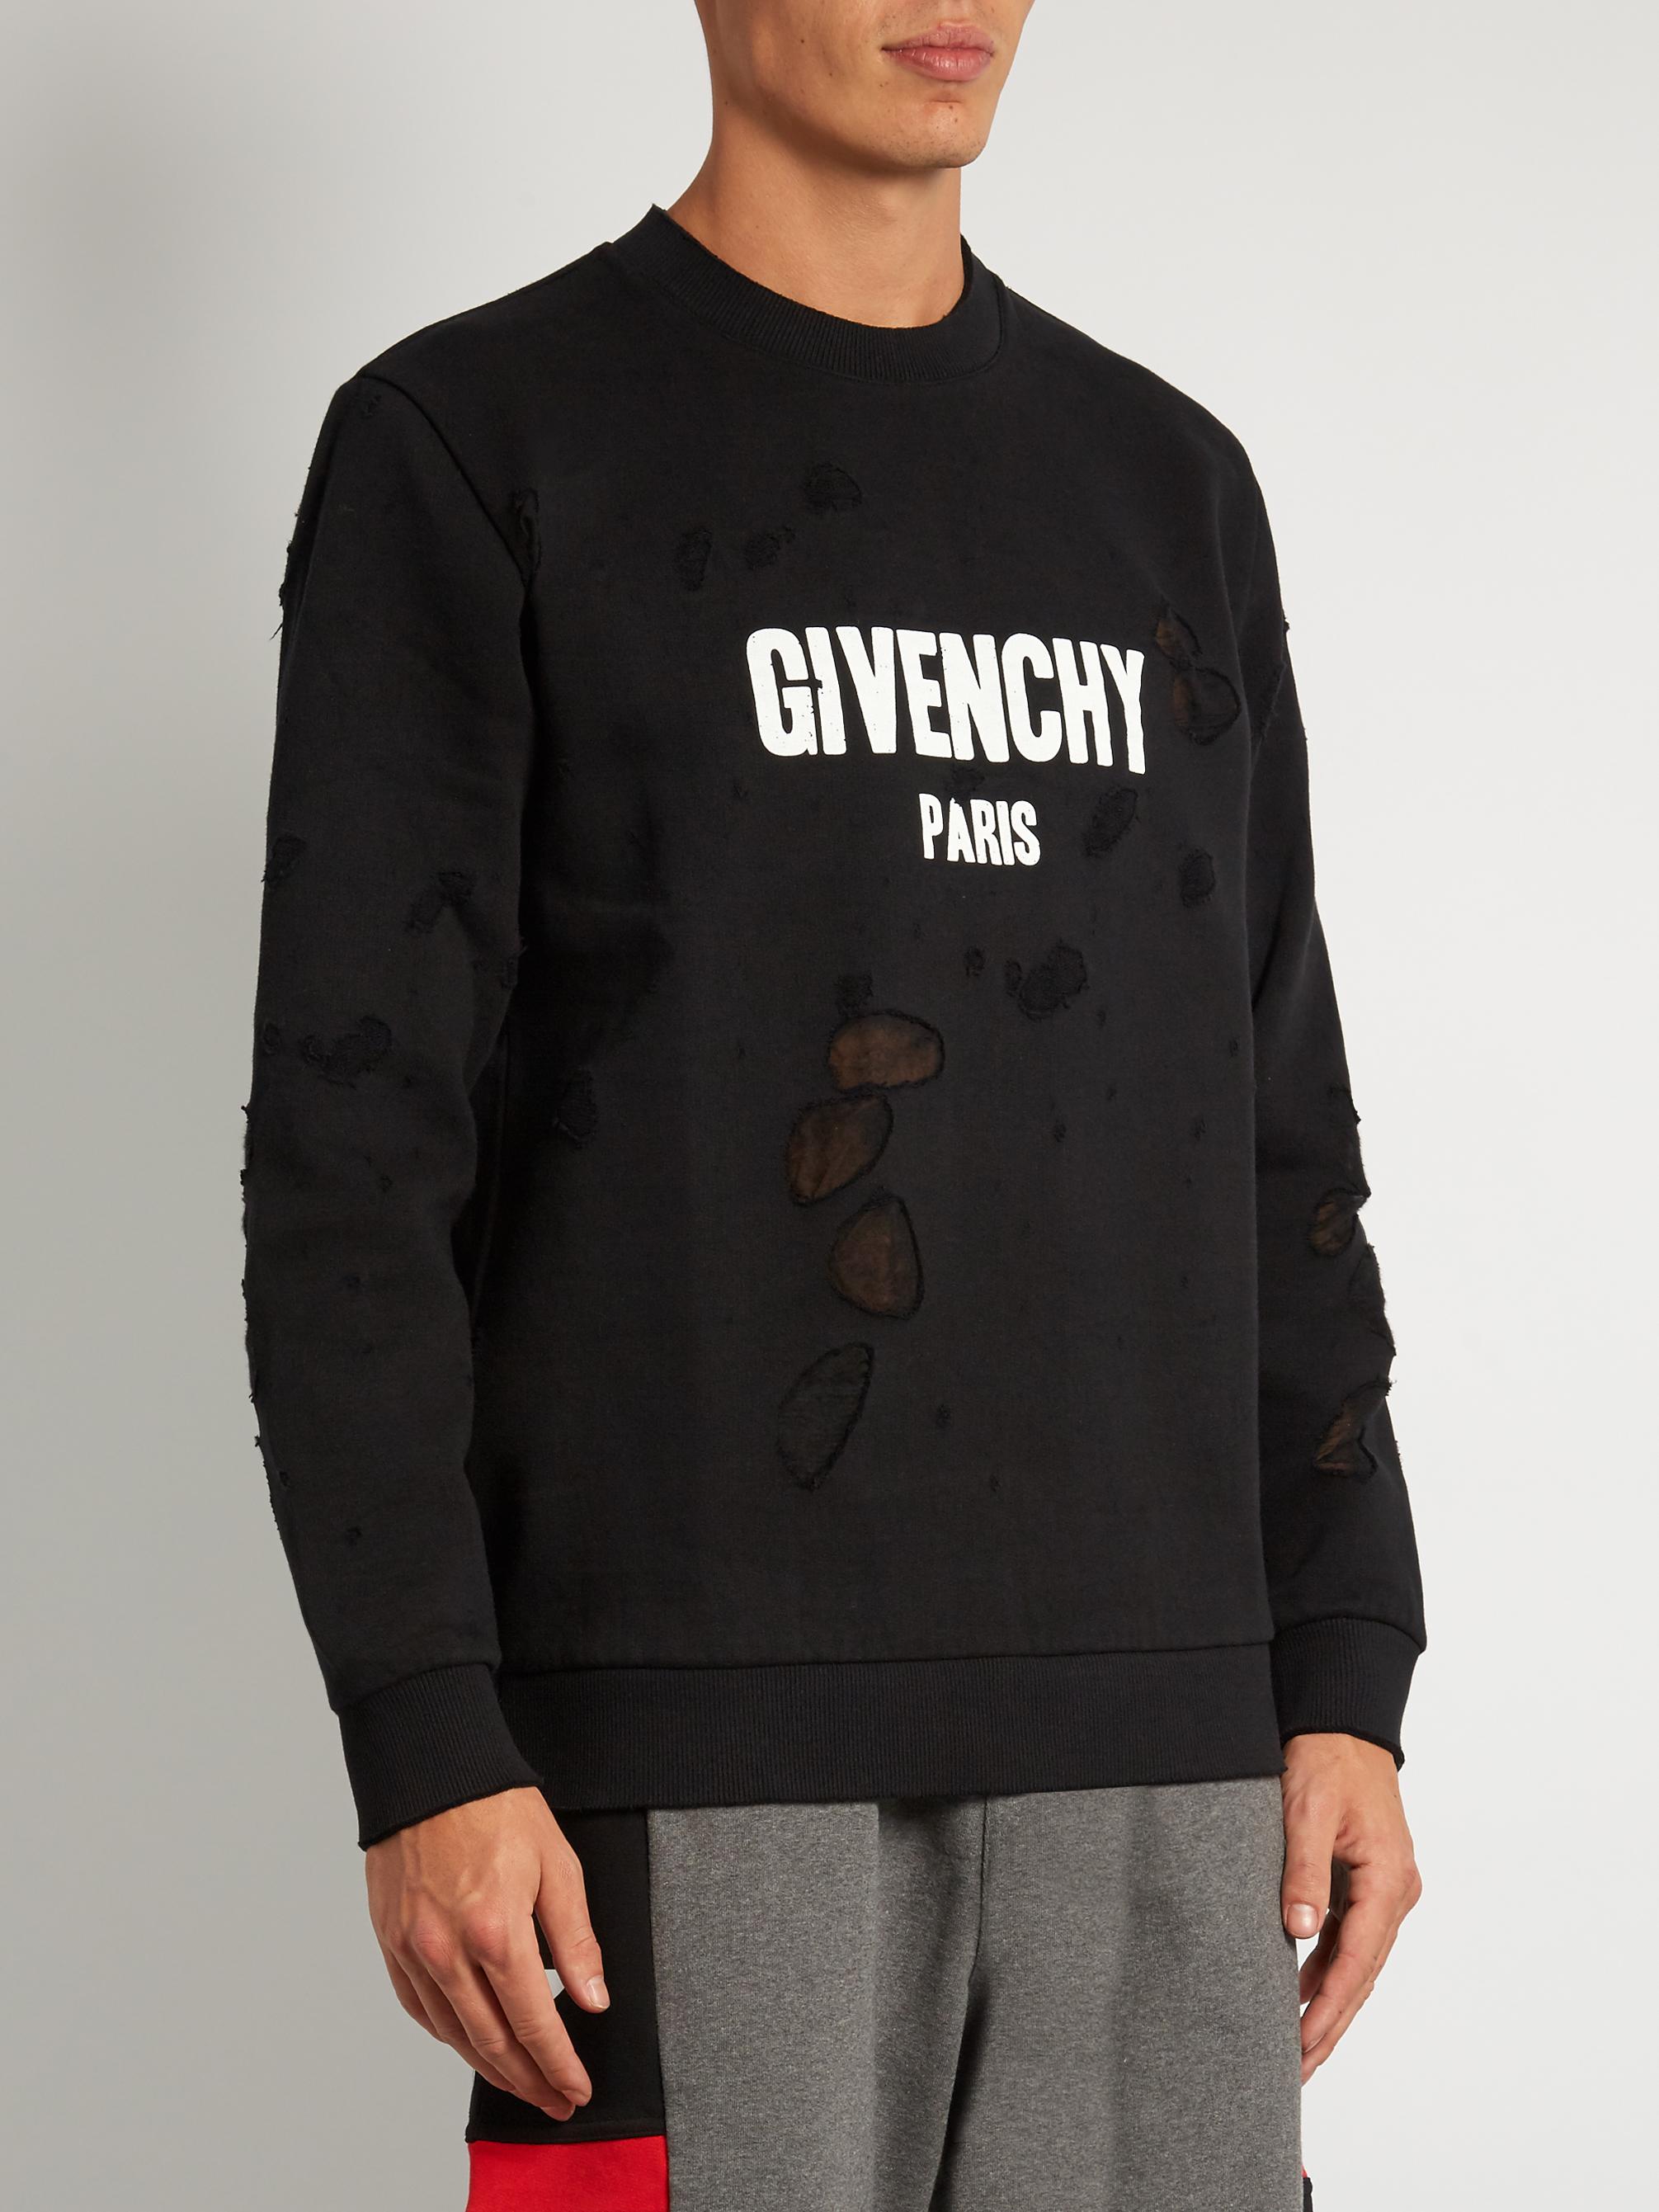 Givenchy Cuban-fit Distressed Sweatshirt in Black for Men - Lyst